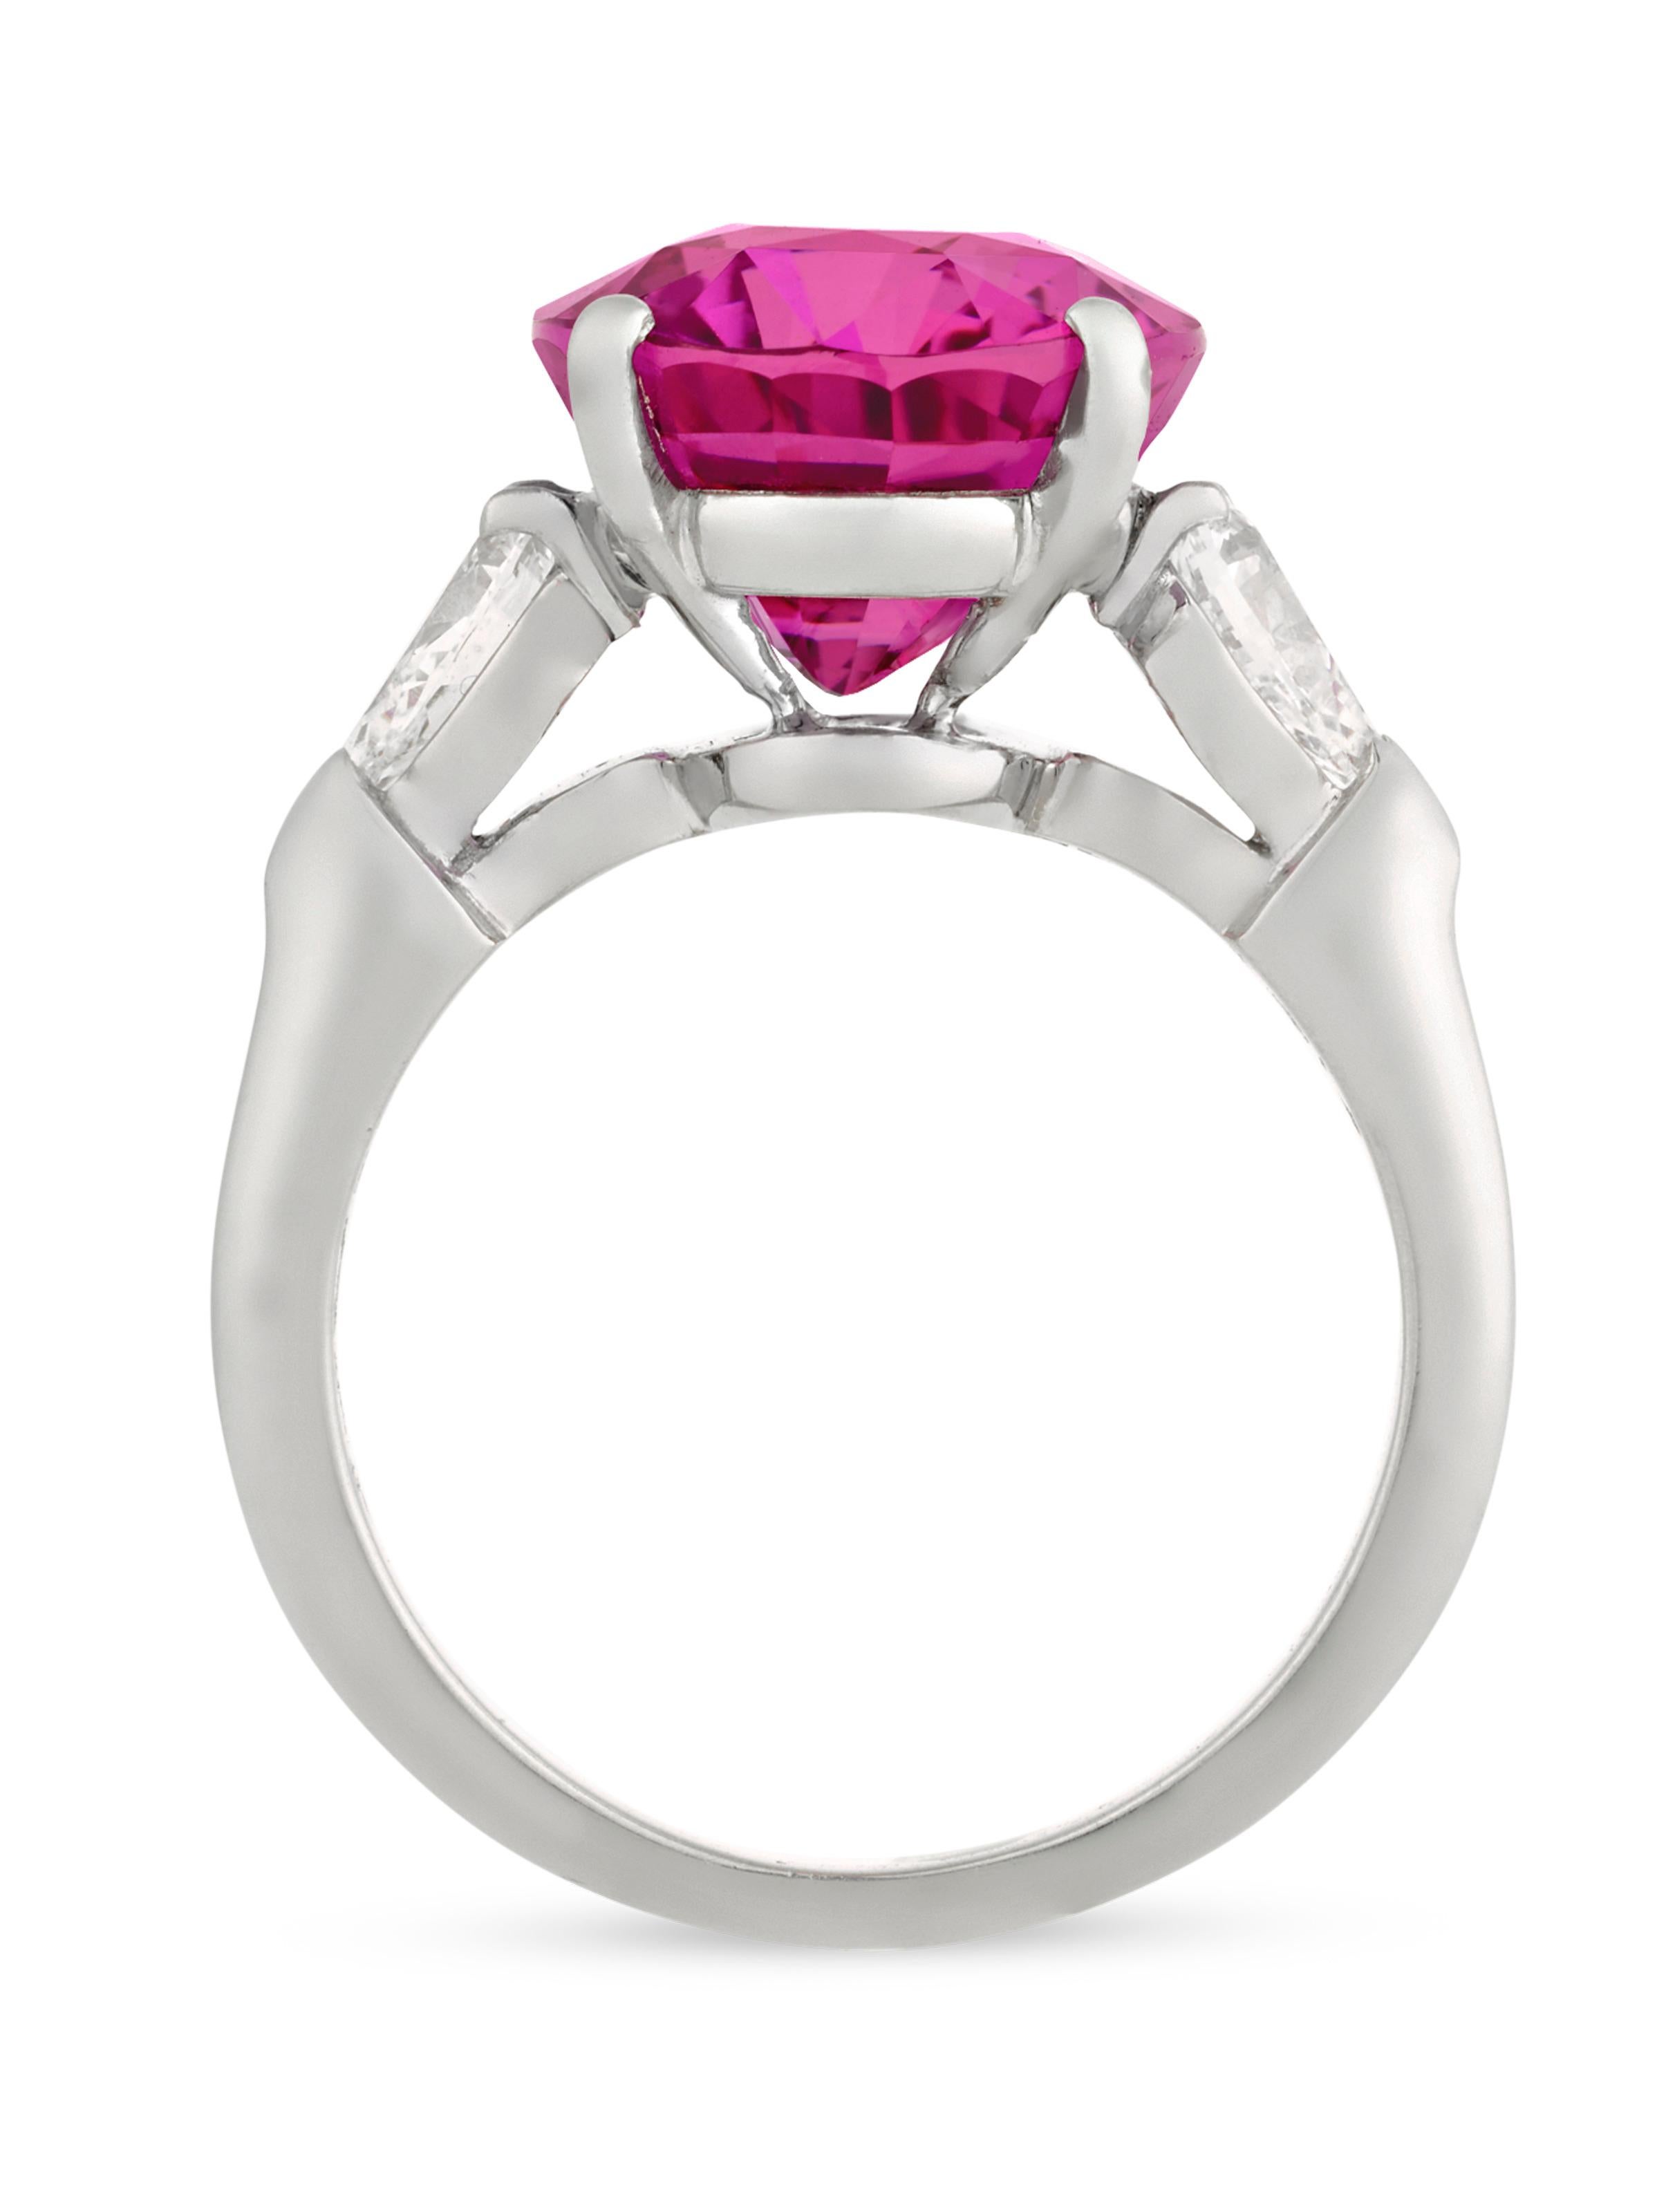 Stunning color distinguishes the natural pink Ceylon sapphire in this ring by the famed House of Graff. This 7.51-carat gemstone is of the highest caliber, displaying the perfect vivid 